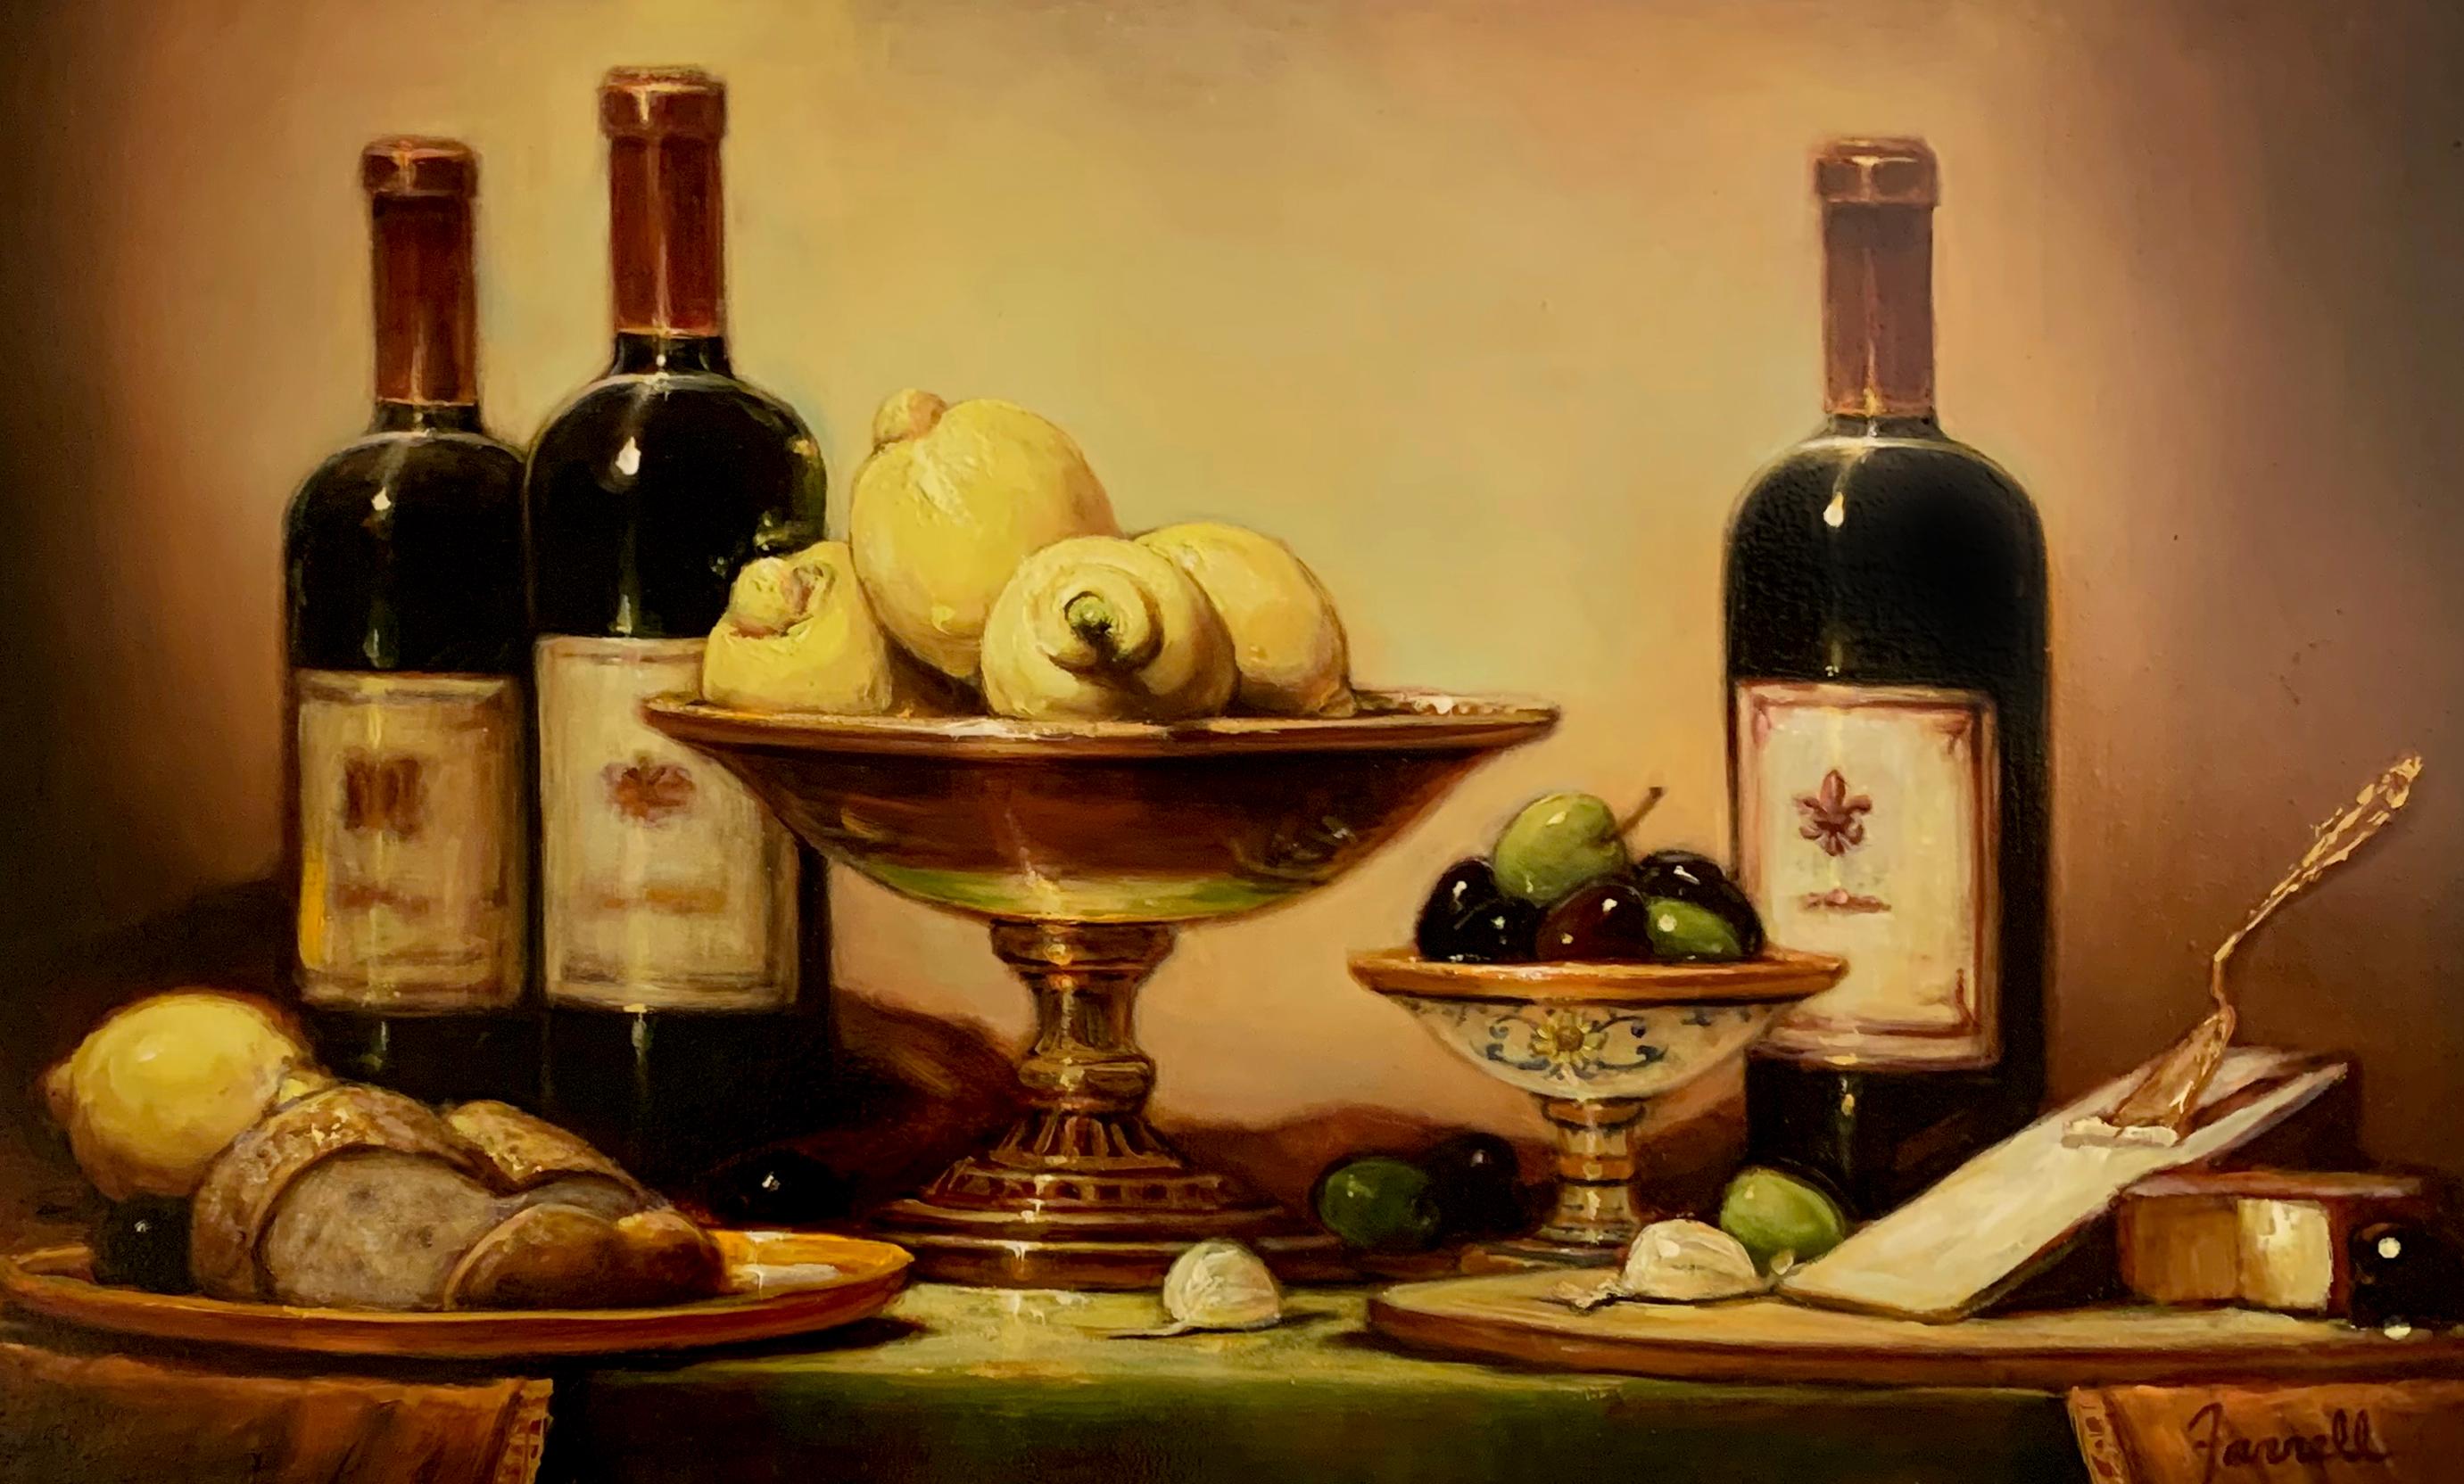 Sean Farrell, "Wine and Cheese", 15x24 Tuscan Still Life Oil Painting on Board